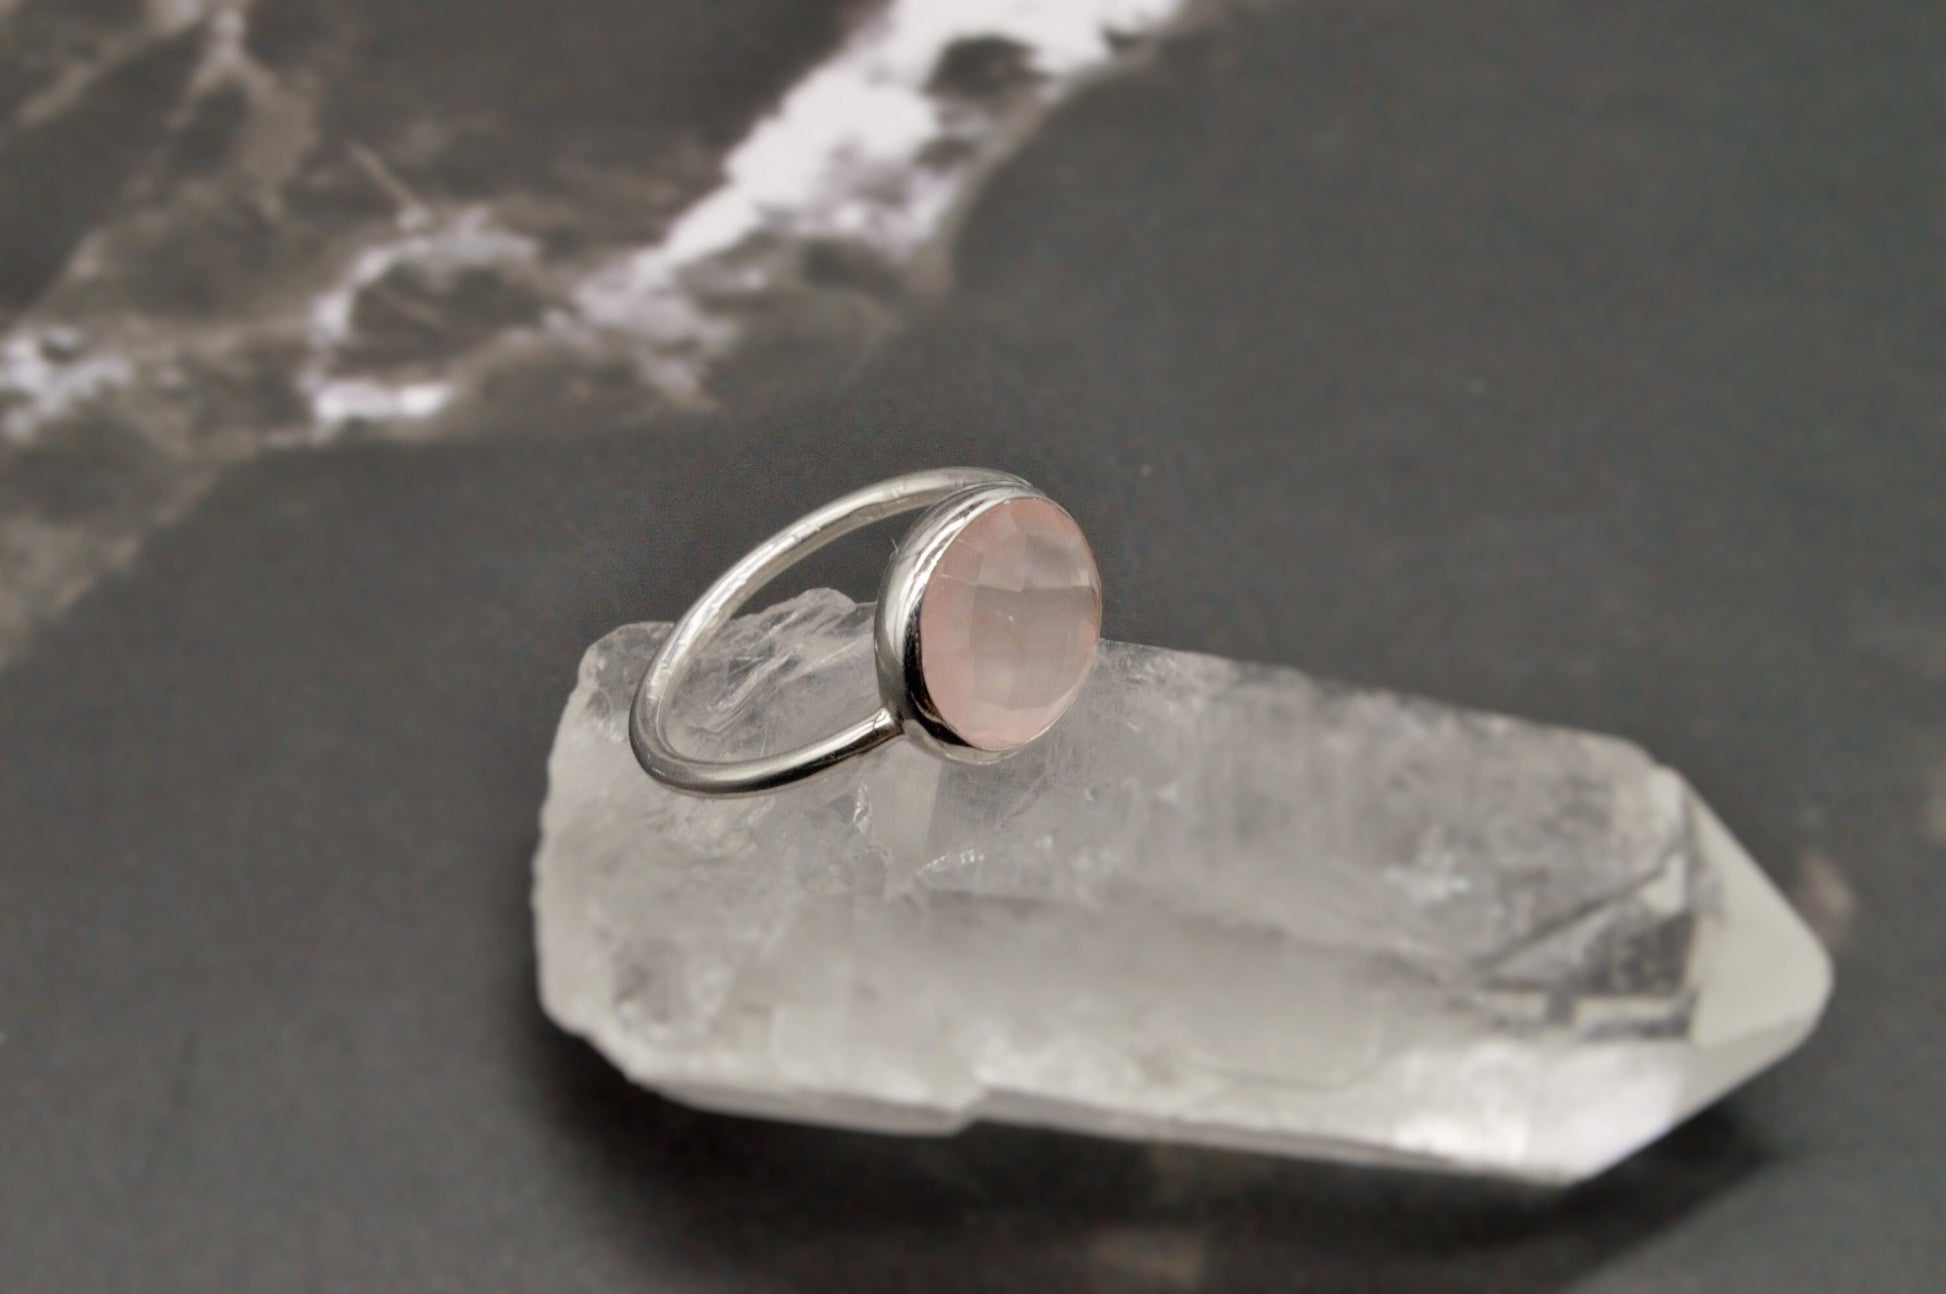 Big Rose Quartz Ring, Sterling Silver Ring, Rose Quartz Jewelry, Pink Rings, Statement Rings, Gift For Her, UK size Q 1/2, Heart Chakra Ring